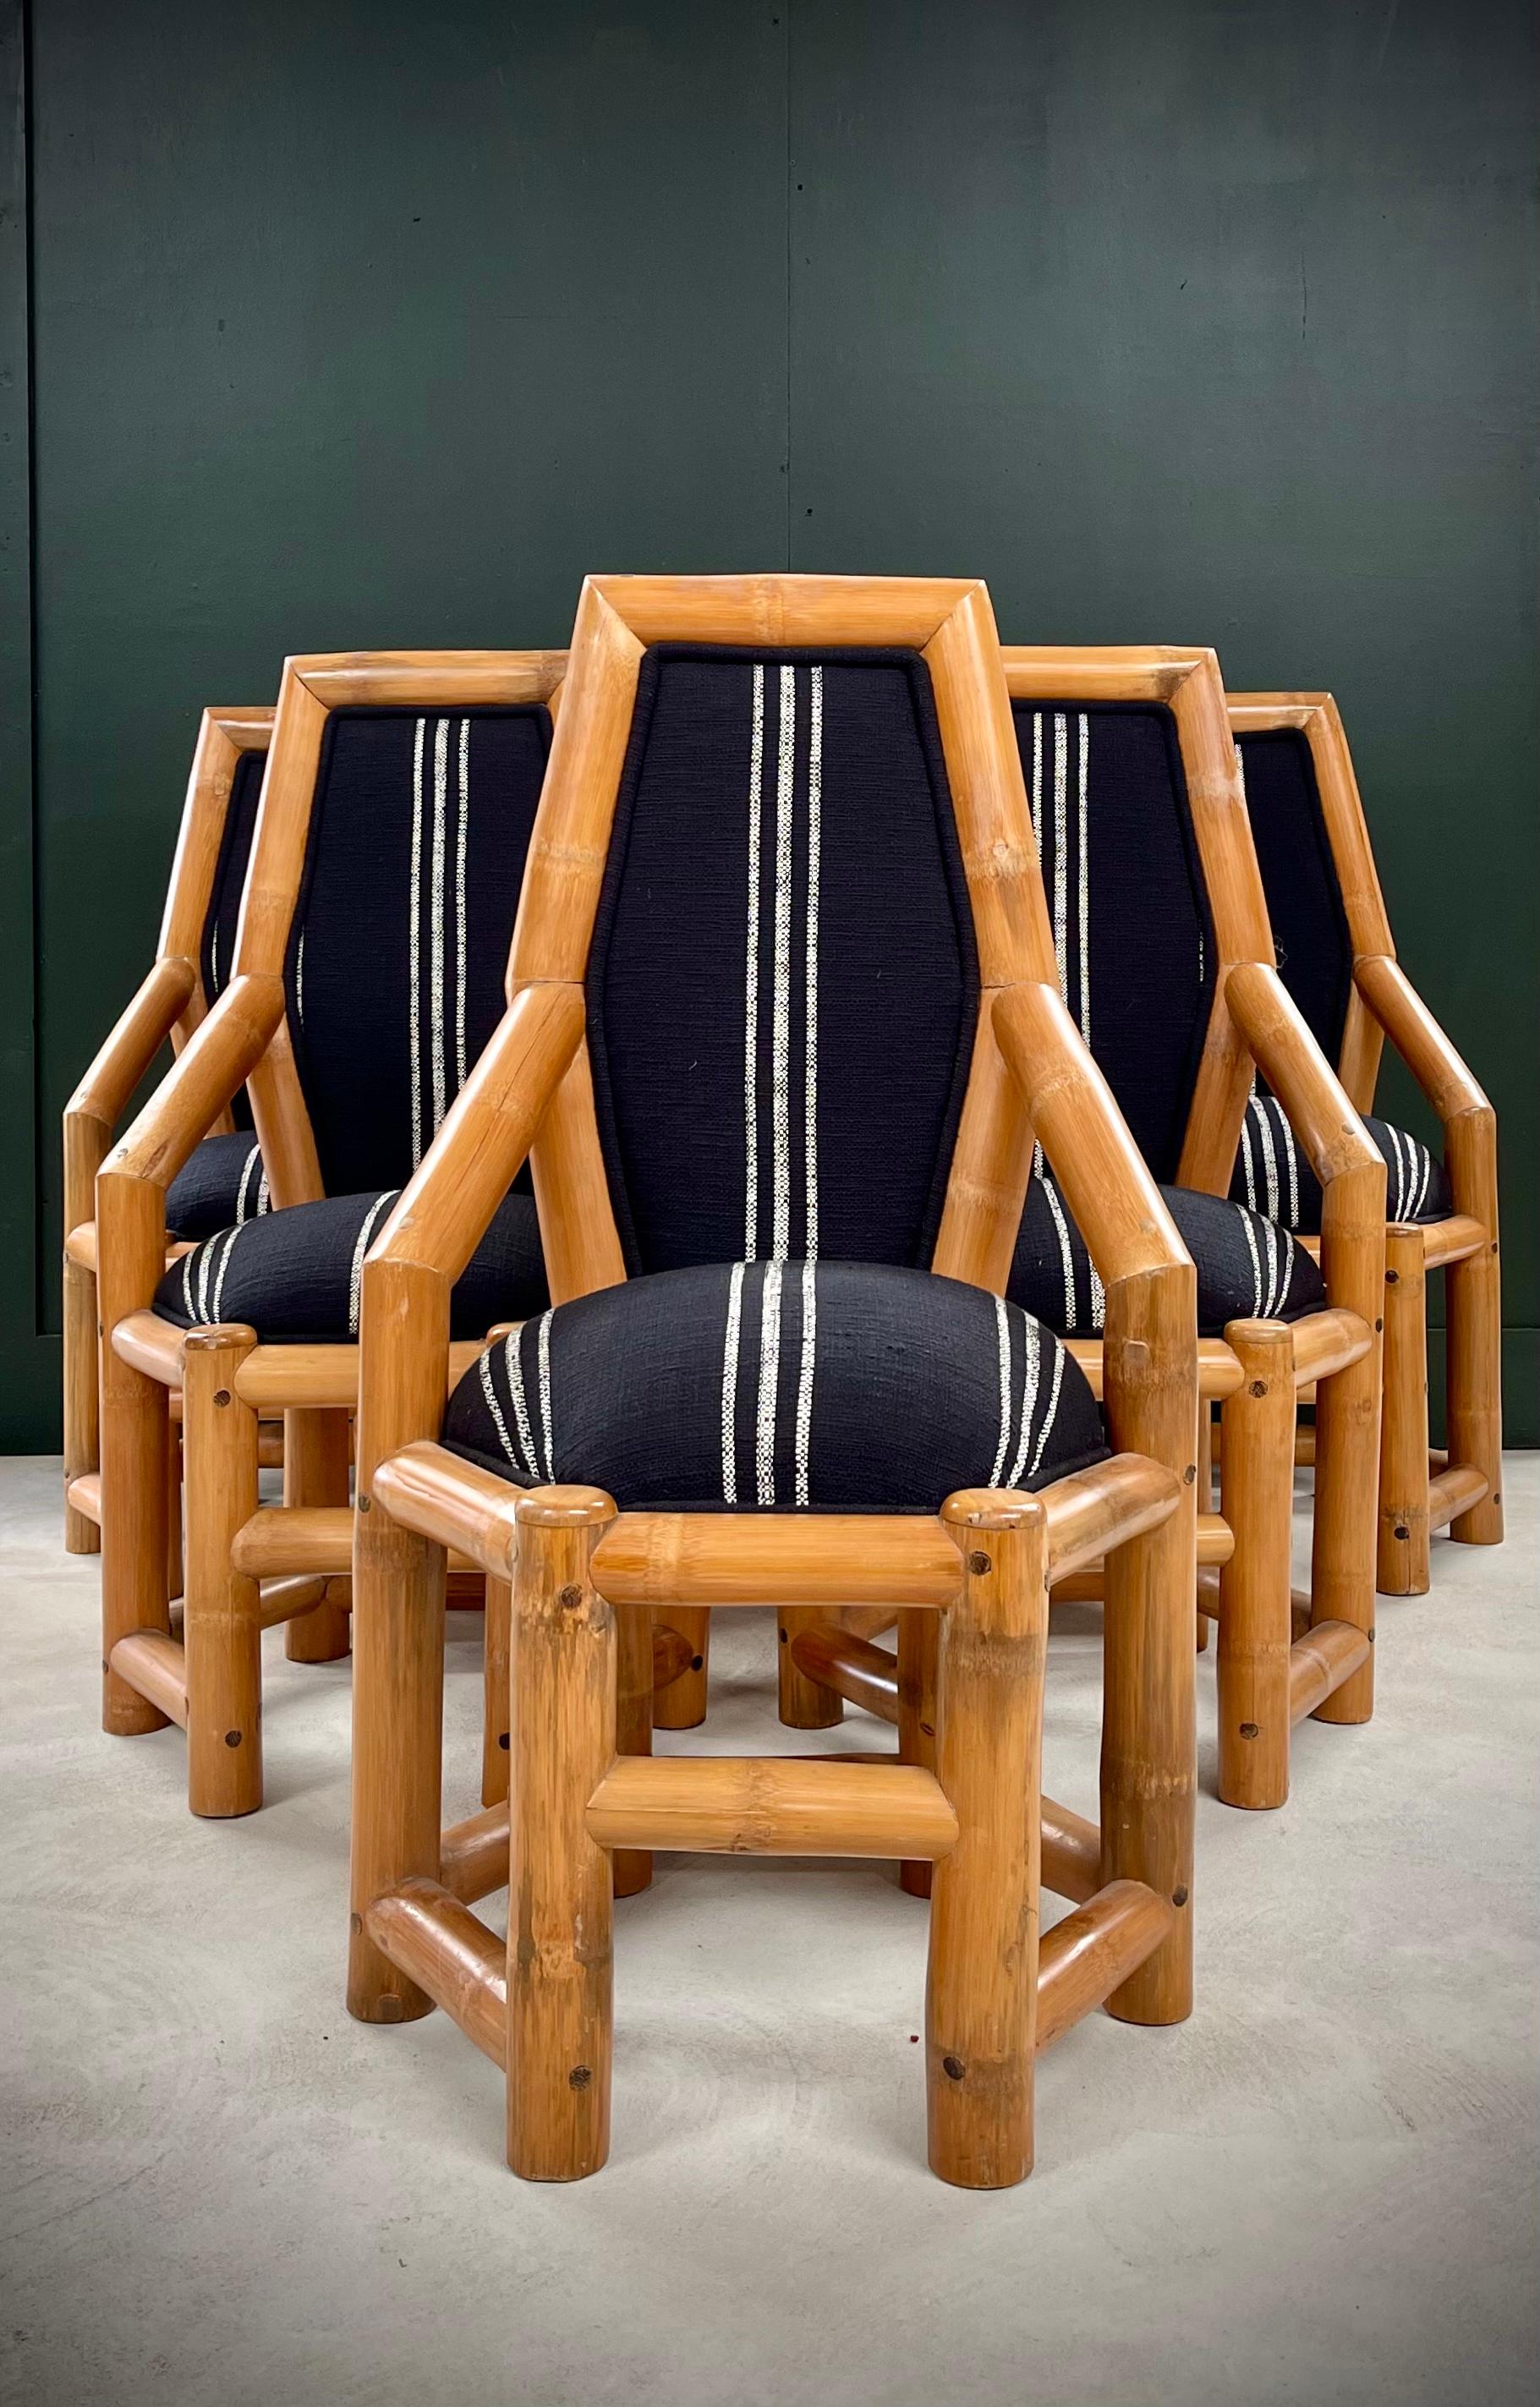 Elevate your dining space with this set of six postmodern oversized chunky bamboo chairs, freshly upholstered for a contemporary twist. Embracing bold lines and organic textures, these chairs make a striking statement with their unique silhouette